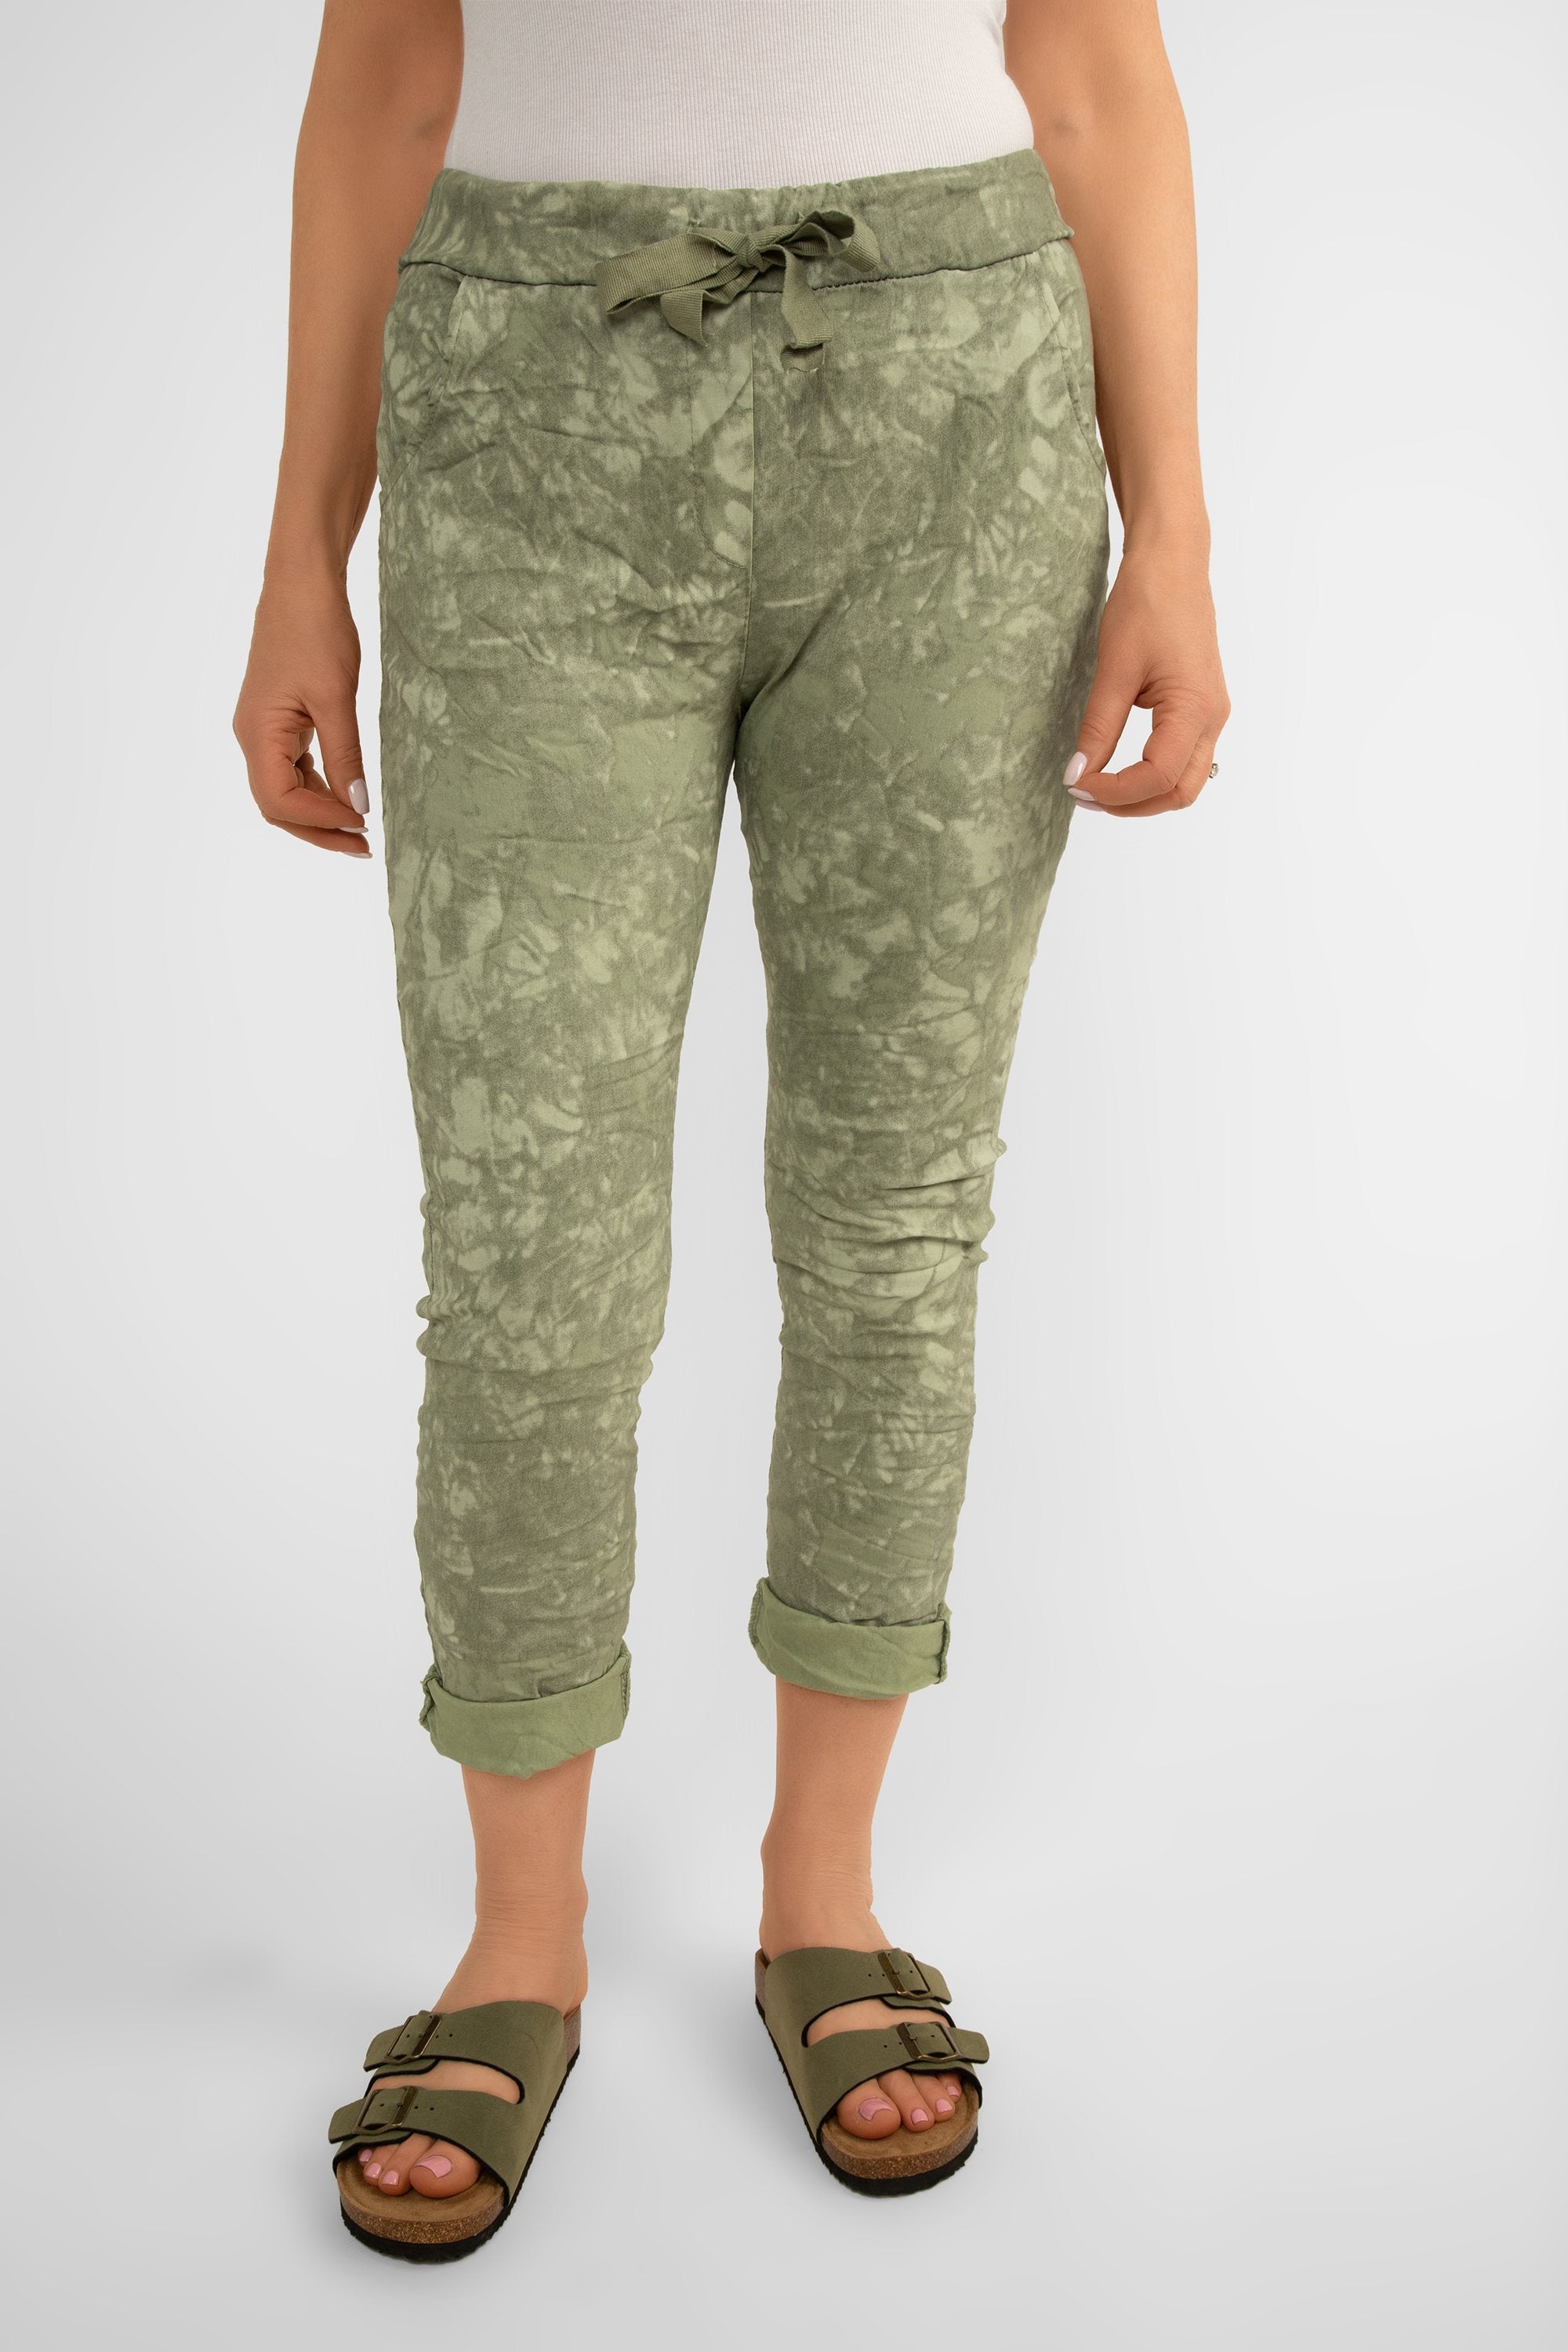 Bella Amore (21287) Women's Slim Fit Cropped Crinkle Pants with Side Pockets and Drawstring Waist, in Military green tie dye print